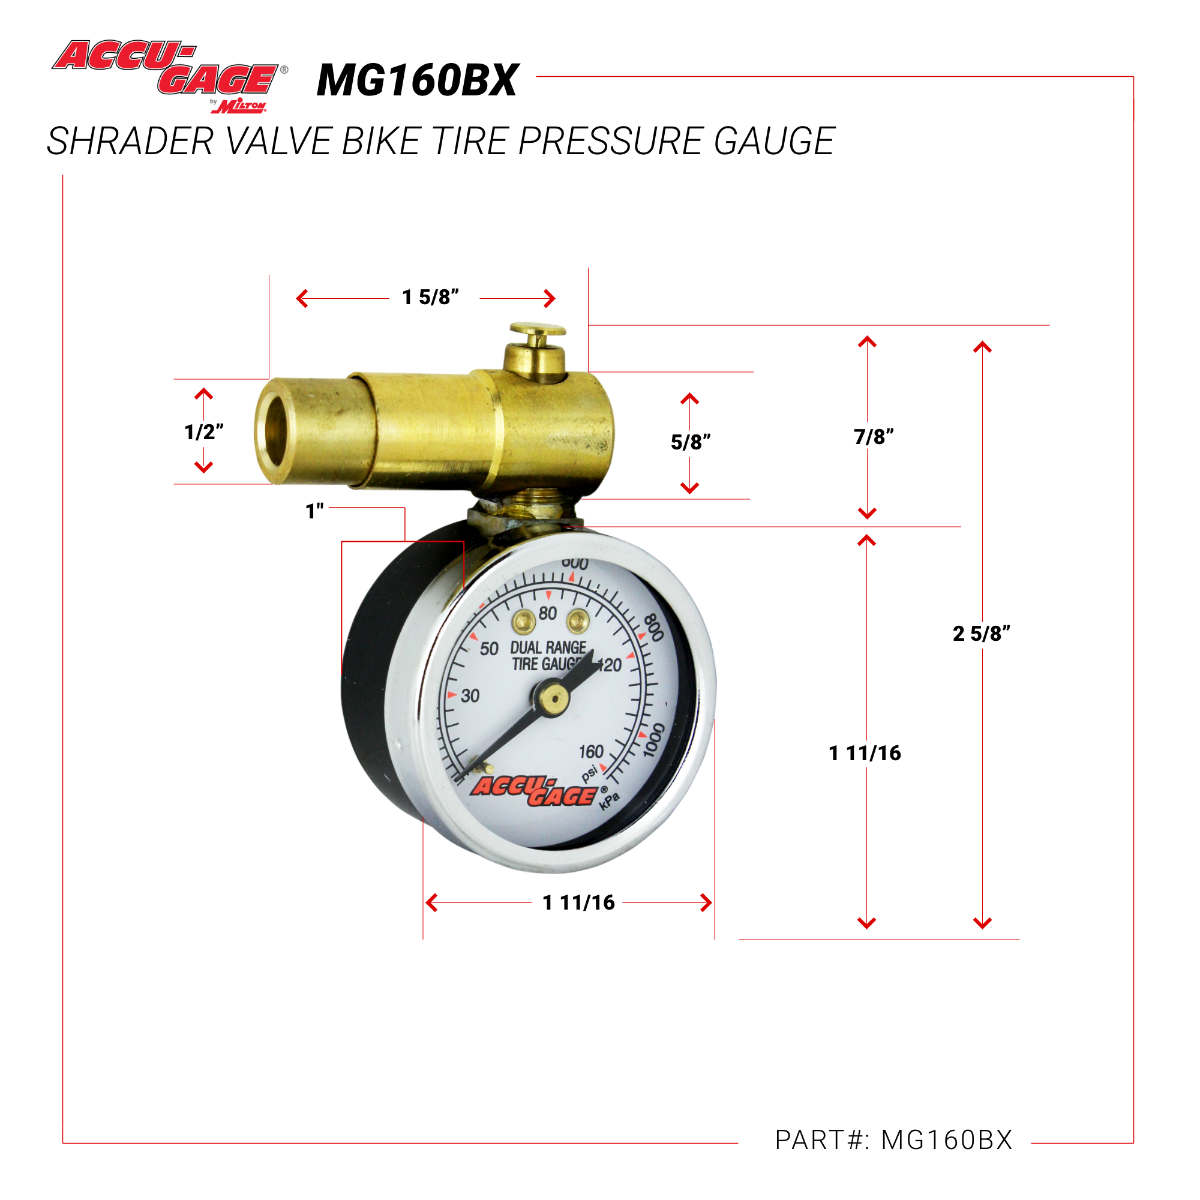 ACCU-GAGE® by Milton® Shrader Valve Bike Tire Pressure Gauge with Bleed Valve, for 0-160 PSI - ANSI Certified